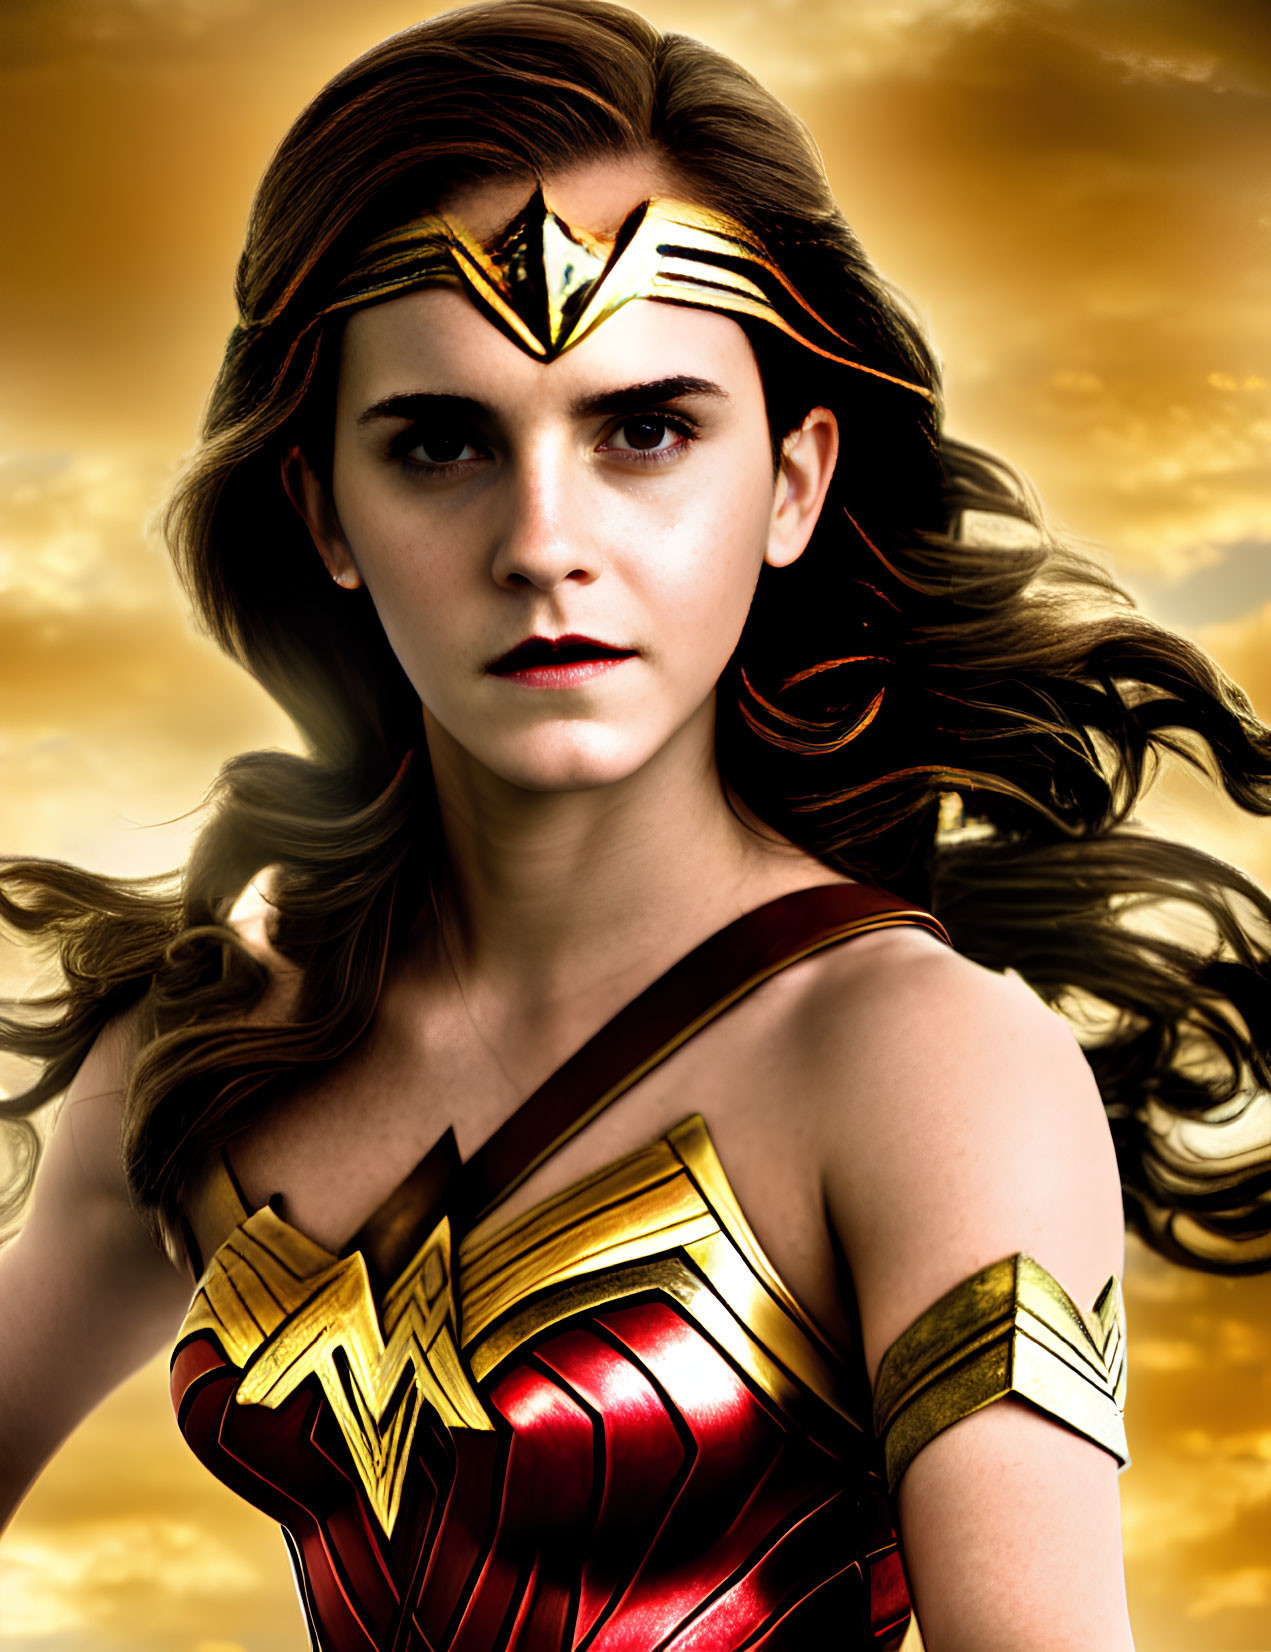 Woman in Wonder Woman costume against dramatic sky with golden tiara